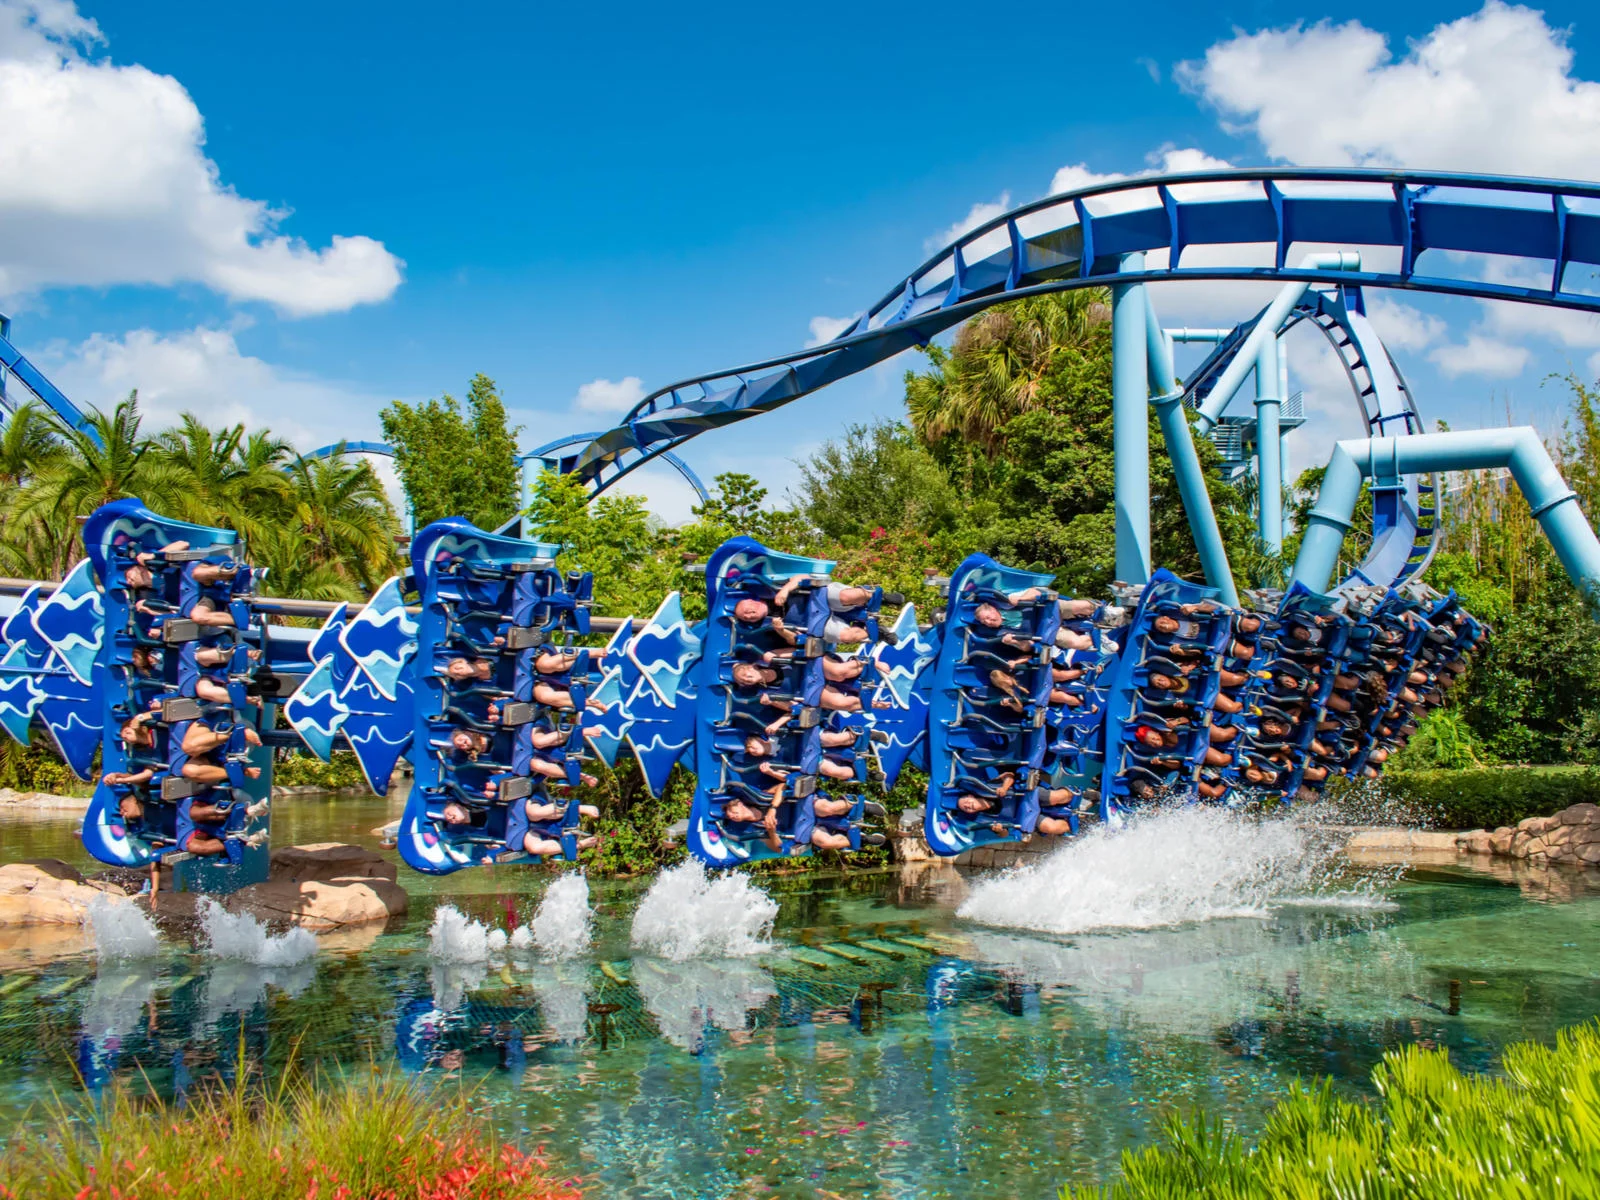 People are thrilled as the twisting Manta Ray roller coaster at SeaWorld in Orlando, Florida, one of the best roller coaster parks in the US, takes a sharp turn above a pond